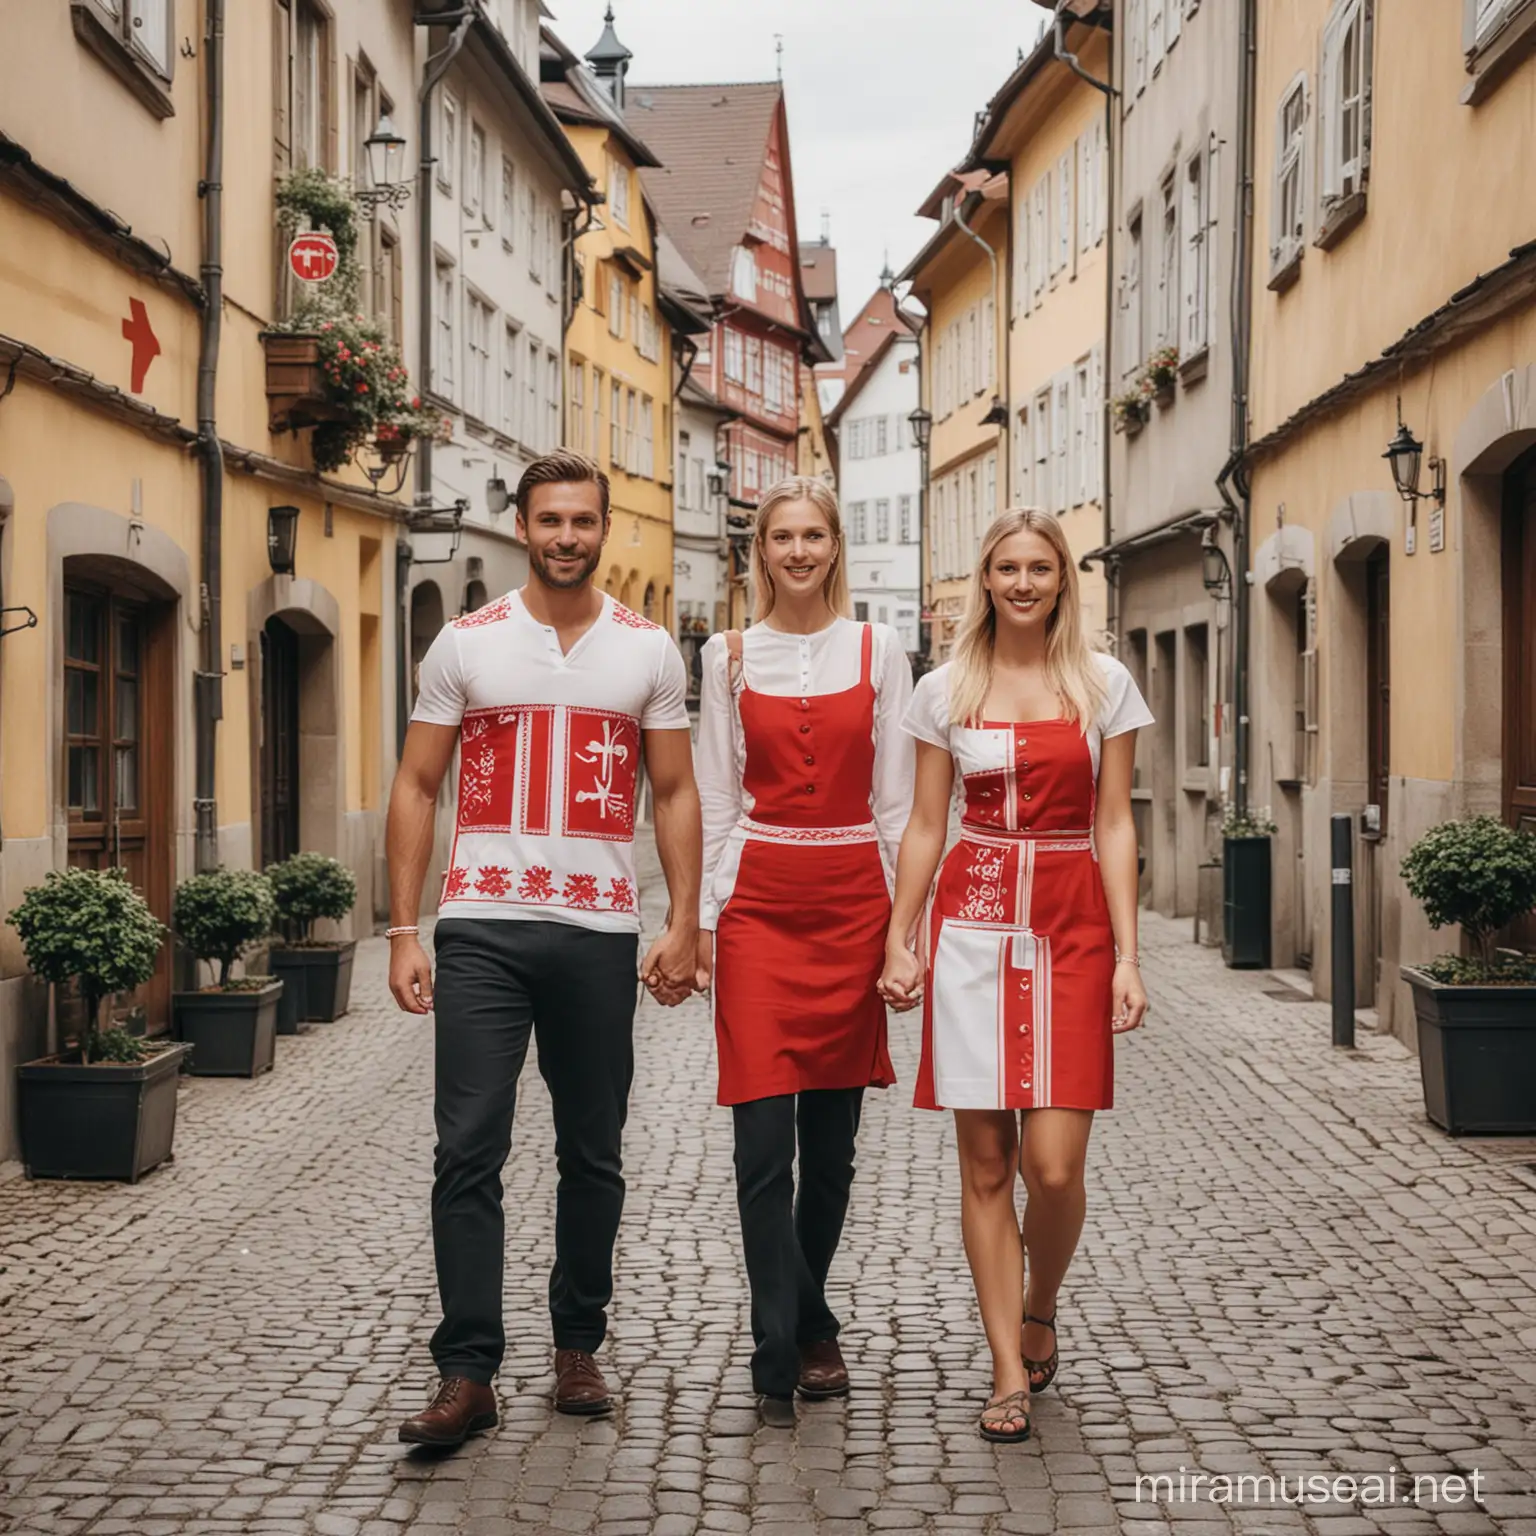 Cultural Differences Between Austrians and Danes Illustrated Through Traditional Attire and Customs